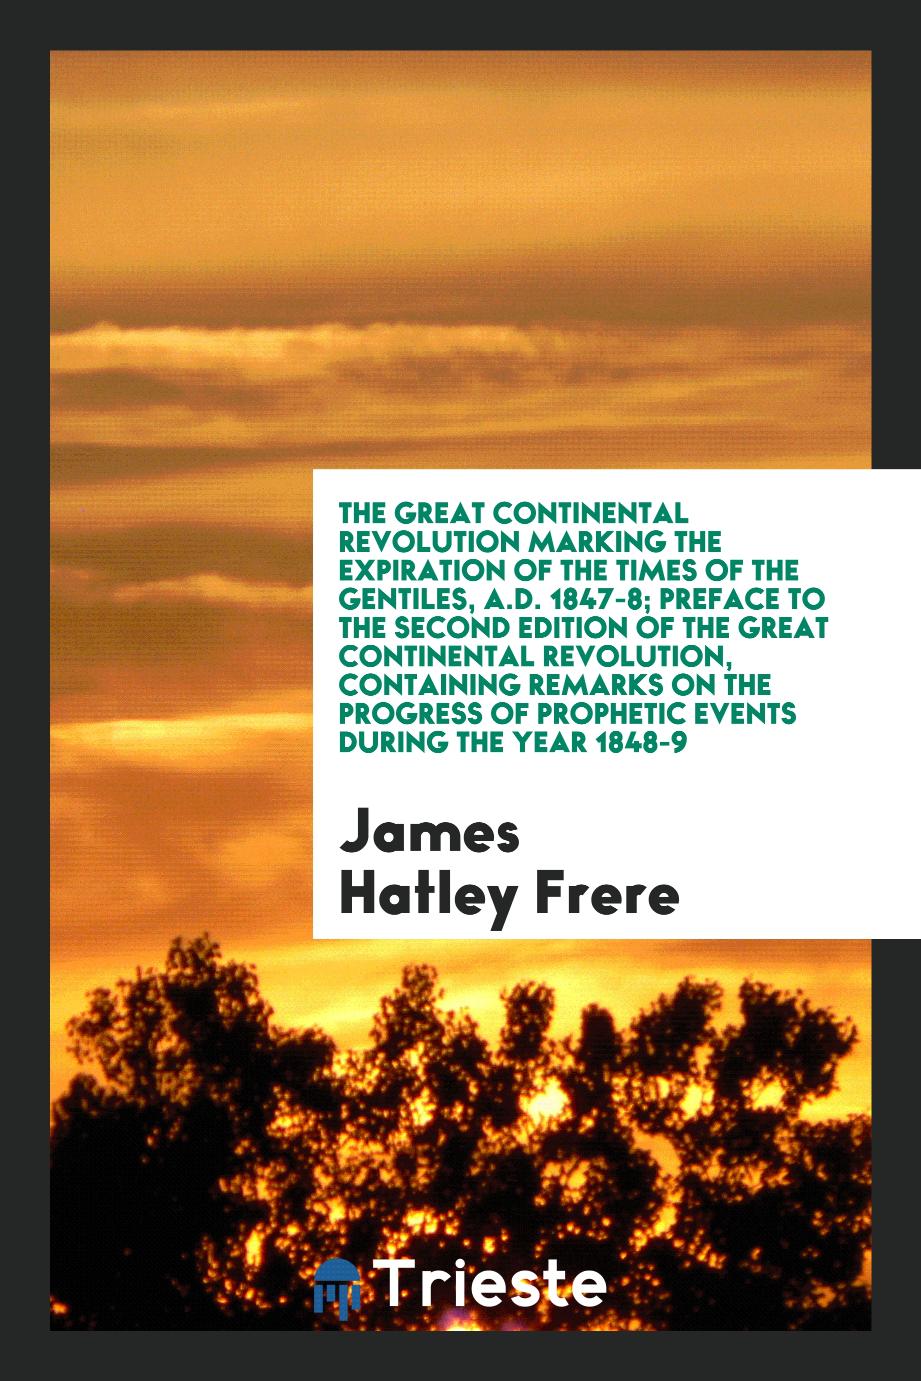 James Hatley Frere - The Great Continental Revolution Marking the Expiration of the Times of the Gentiles, A.D. 1847-8; Preface to the Second Edition of the Great Continental Revolution, Containing Remarks on the Progress of Prophetic Events During the Year 1848-9